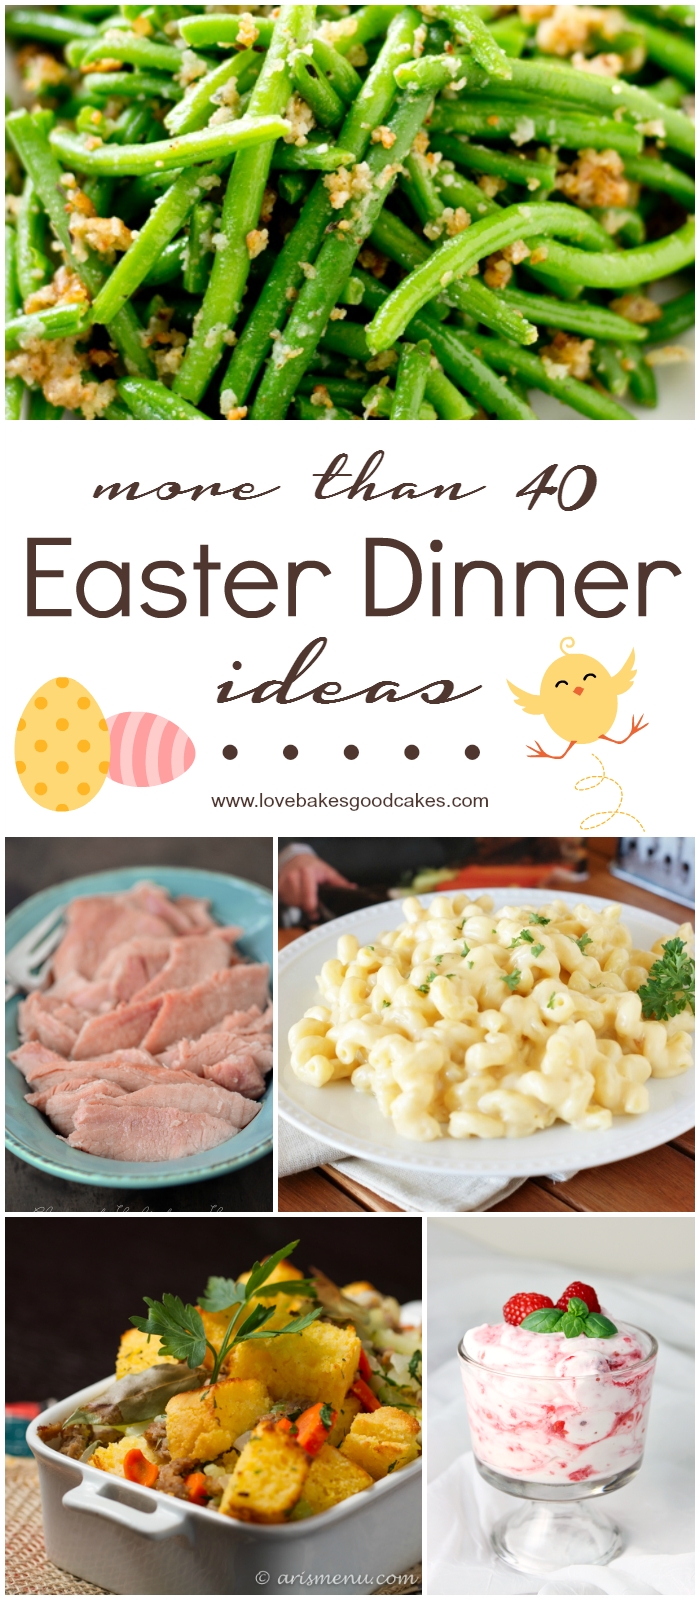 10 Fashionable Easter Sunday Dinner Menu Ideas more than 40 easter dinner ideas easter dinner dinner ideas and 2022